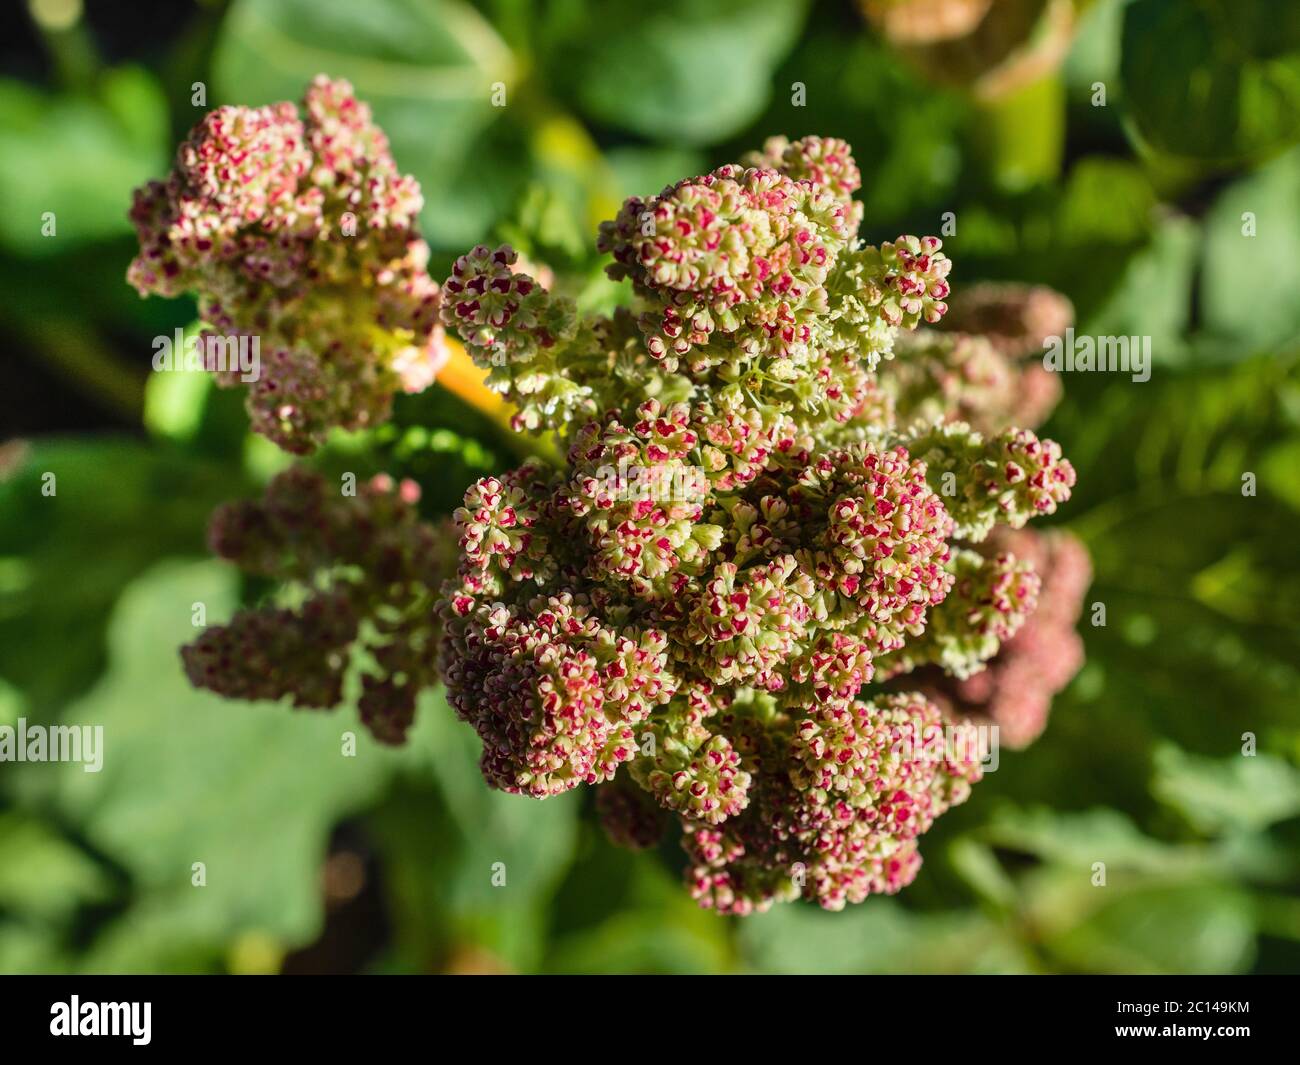 Rhubarb plant flowering and producing seeds. Stock Photo